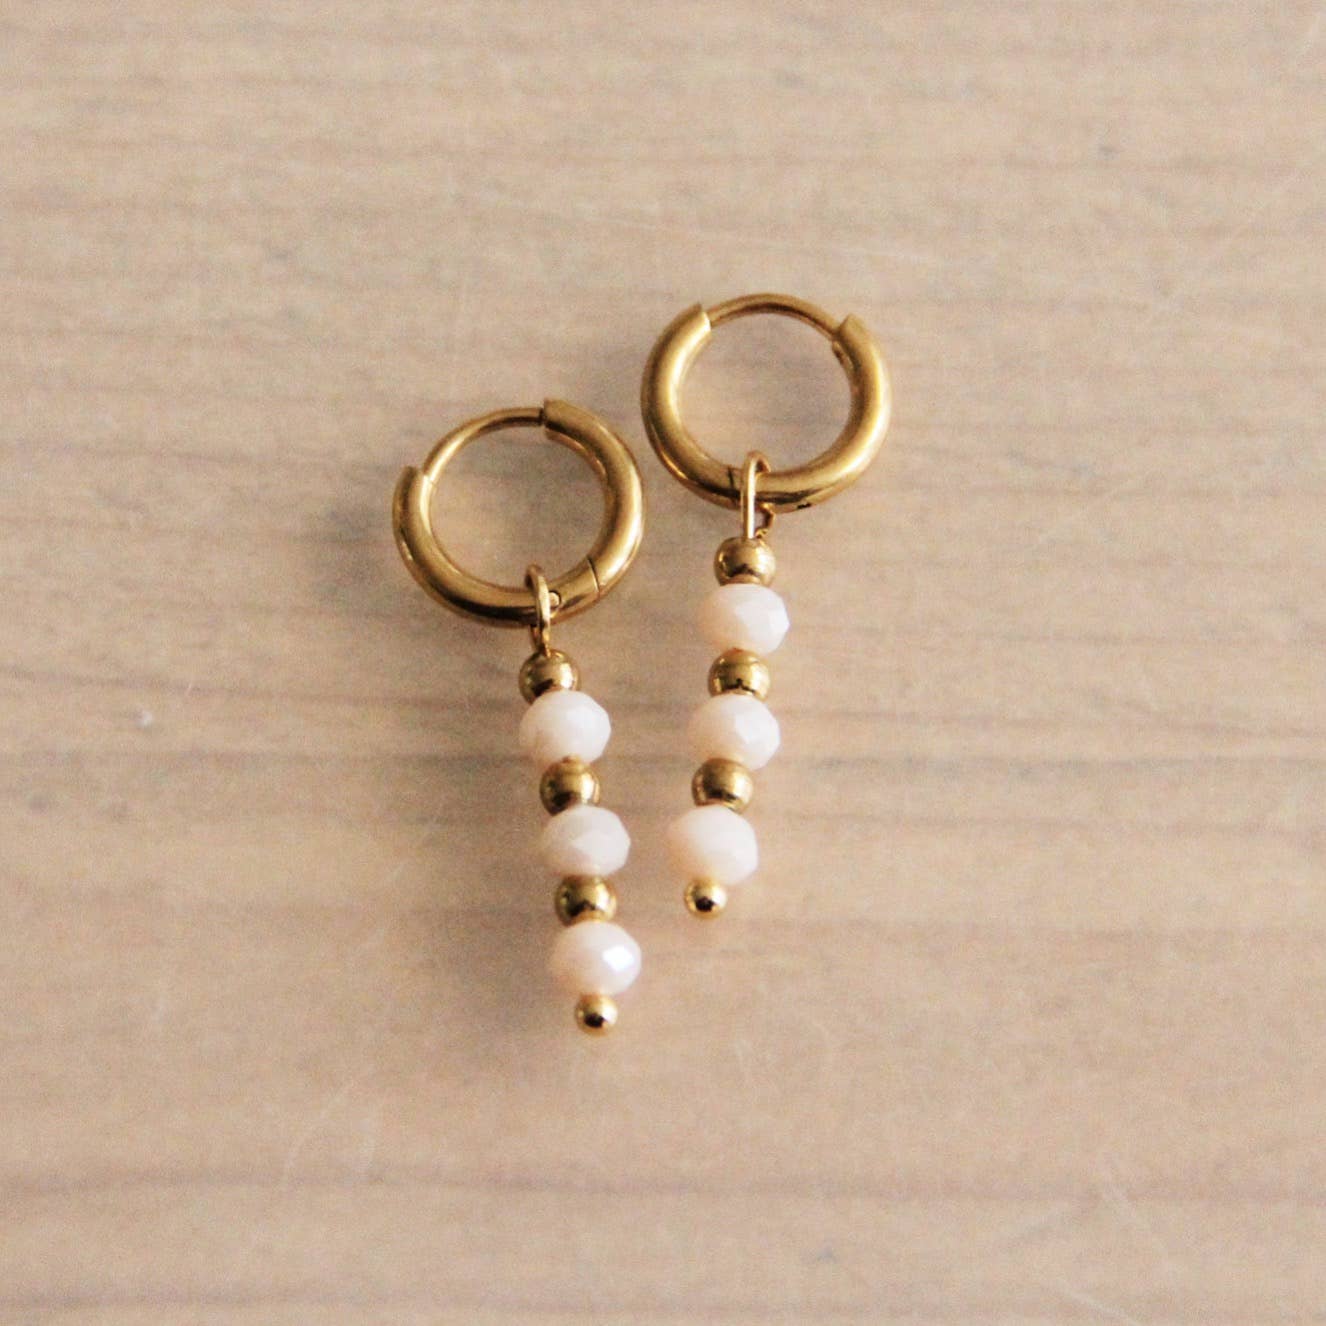 Stainless steel earrings with facets - beige pearl